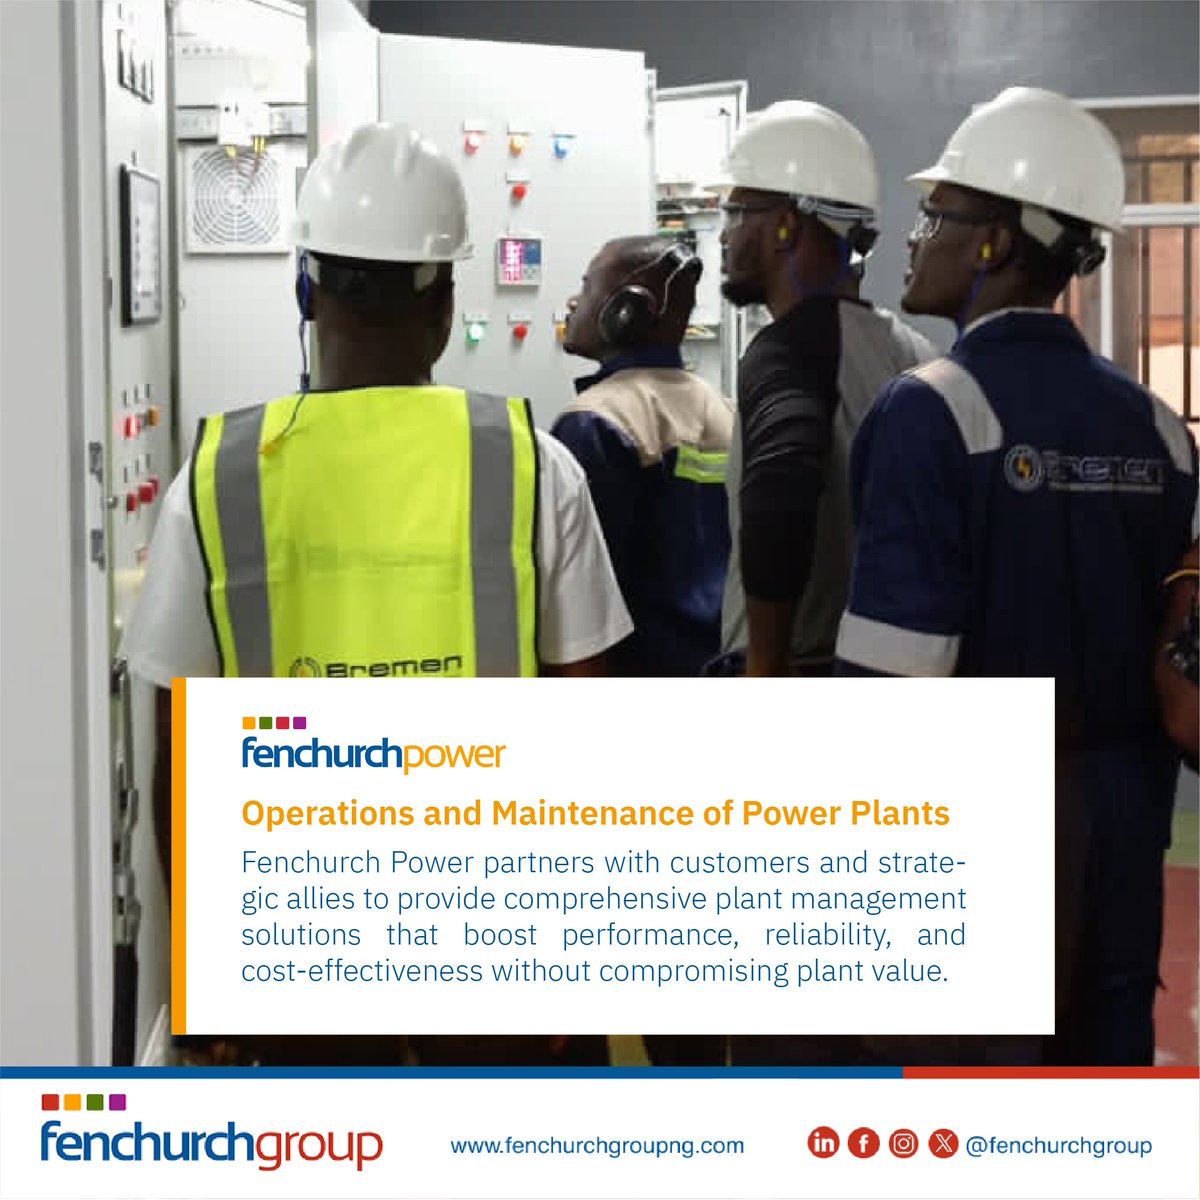 Fenchurch Power and partners offer top-notch plant management solutions, boosting performance, reliability, and value while cutting costs. #FenchurchGroup #FenchurchPower #ServiceDelivery #Quality #PowerEngineers #PowerAfrica